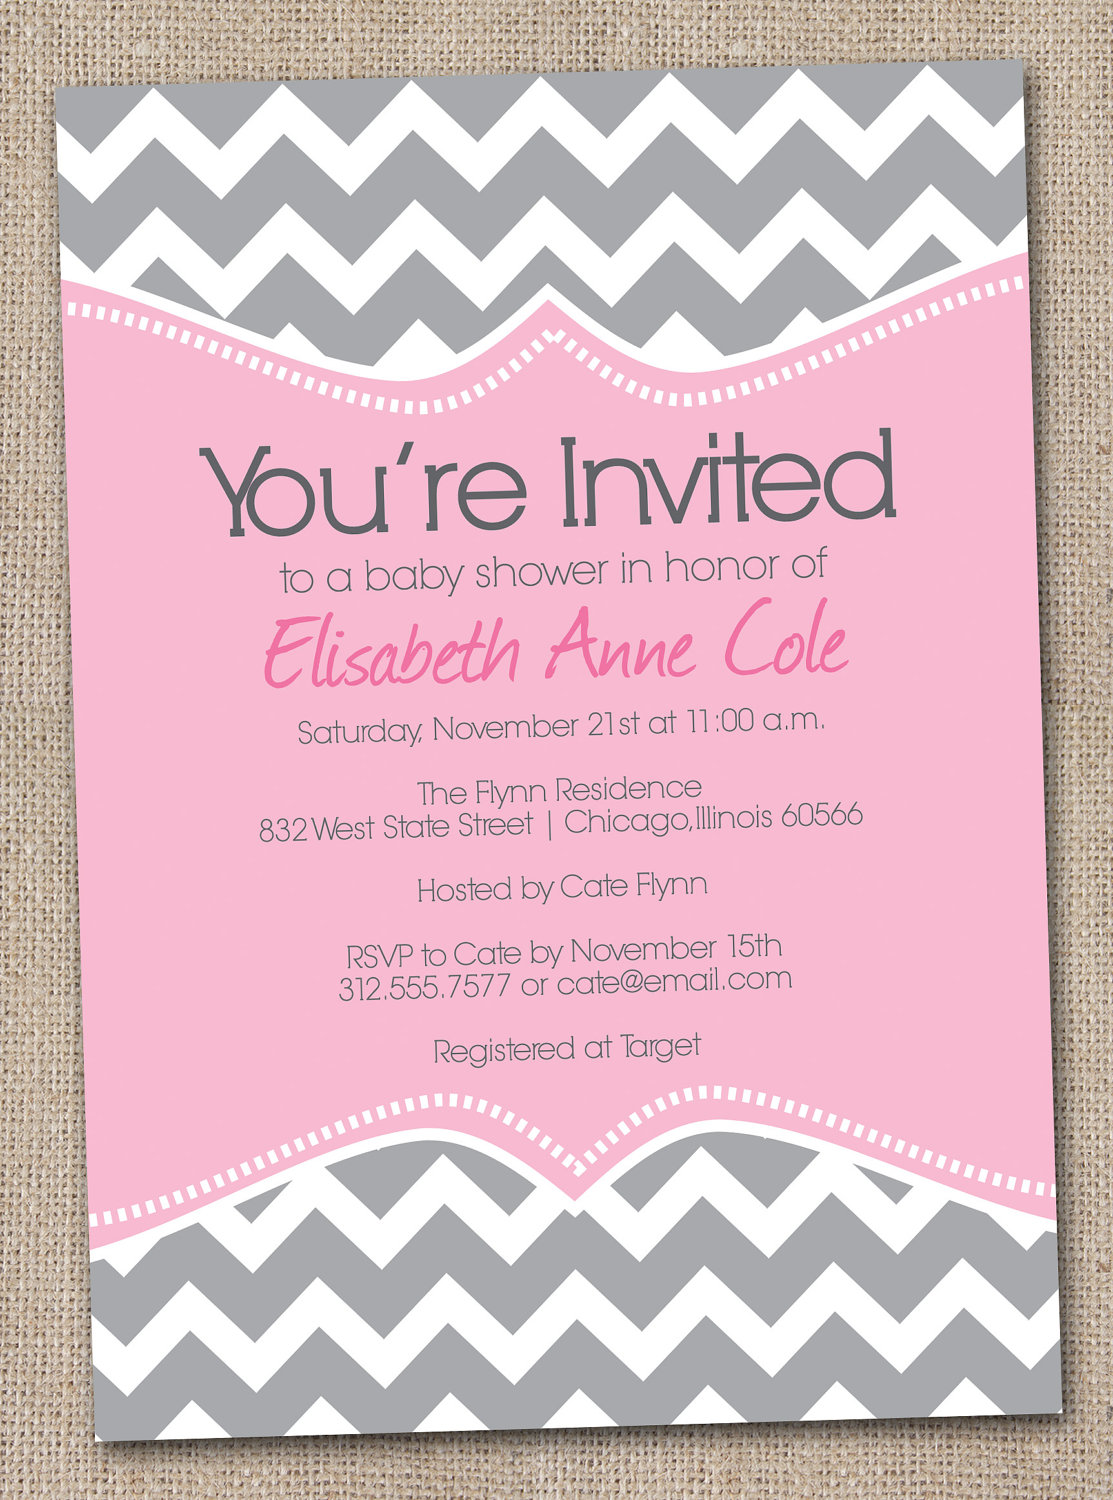 Full Size of Baby Shower:63+ Delightful Cheap Baby Shower Invitations Image Inspirations Arreglos Para Baby Shower Baby Shower Centerpieces Baby Shower Venues Nyc Baby Shower Stuff